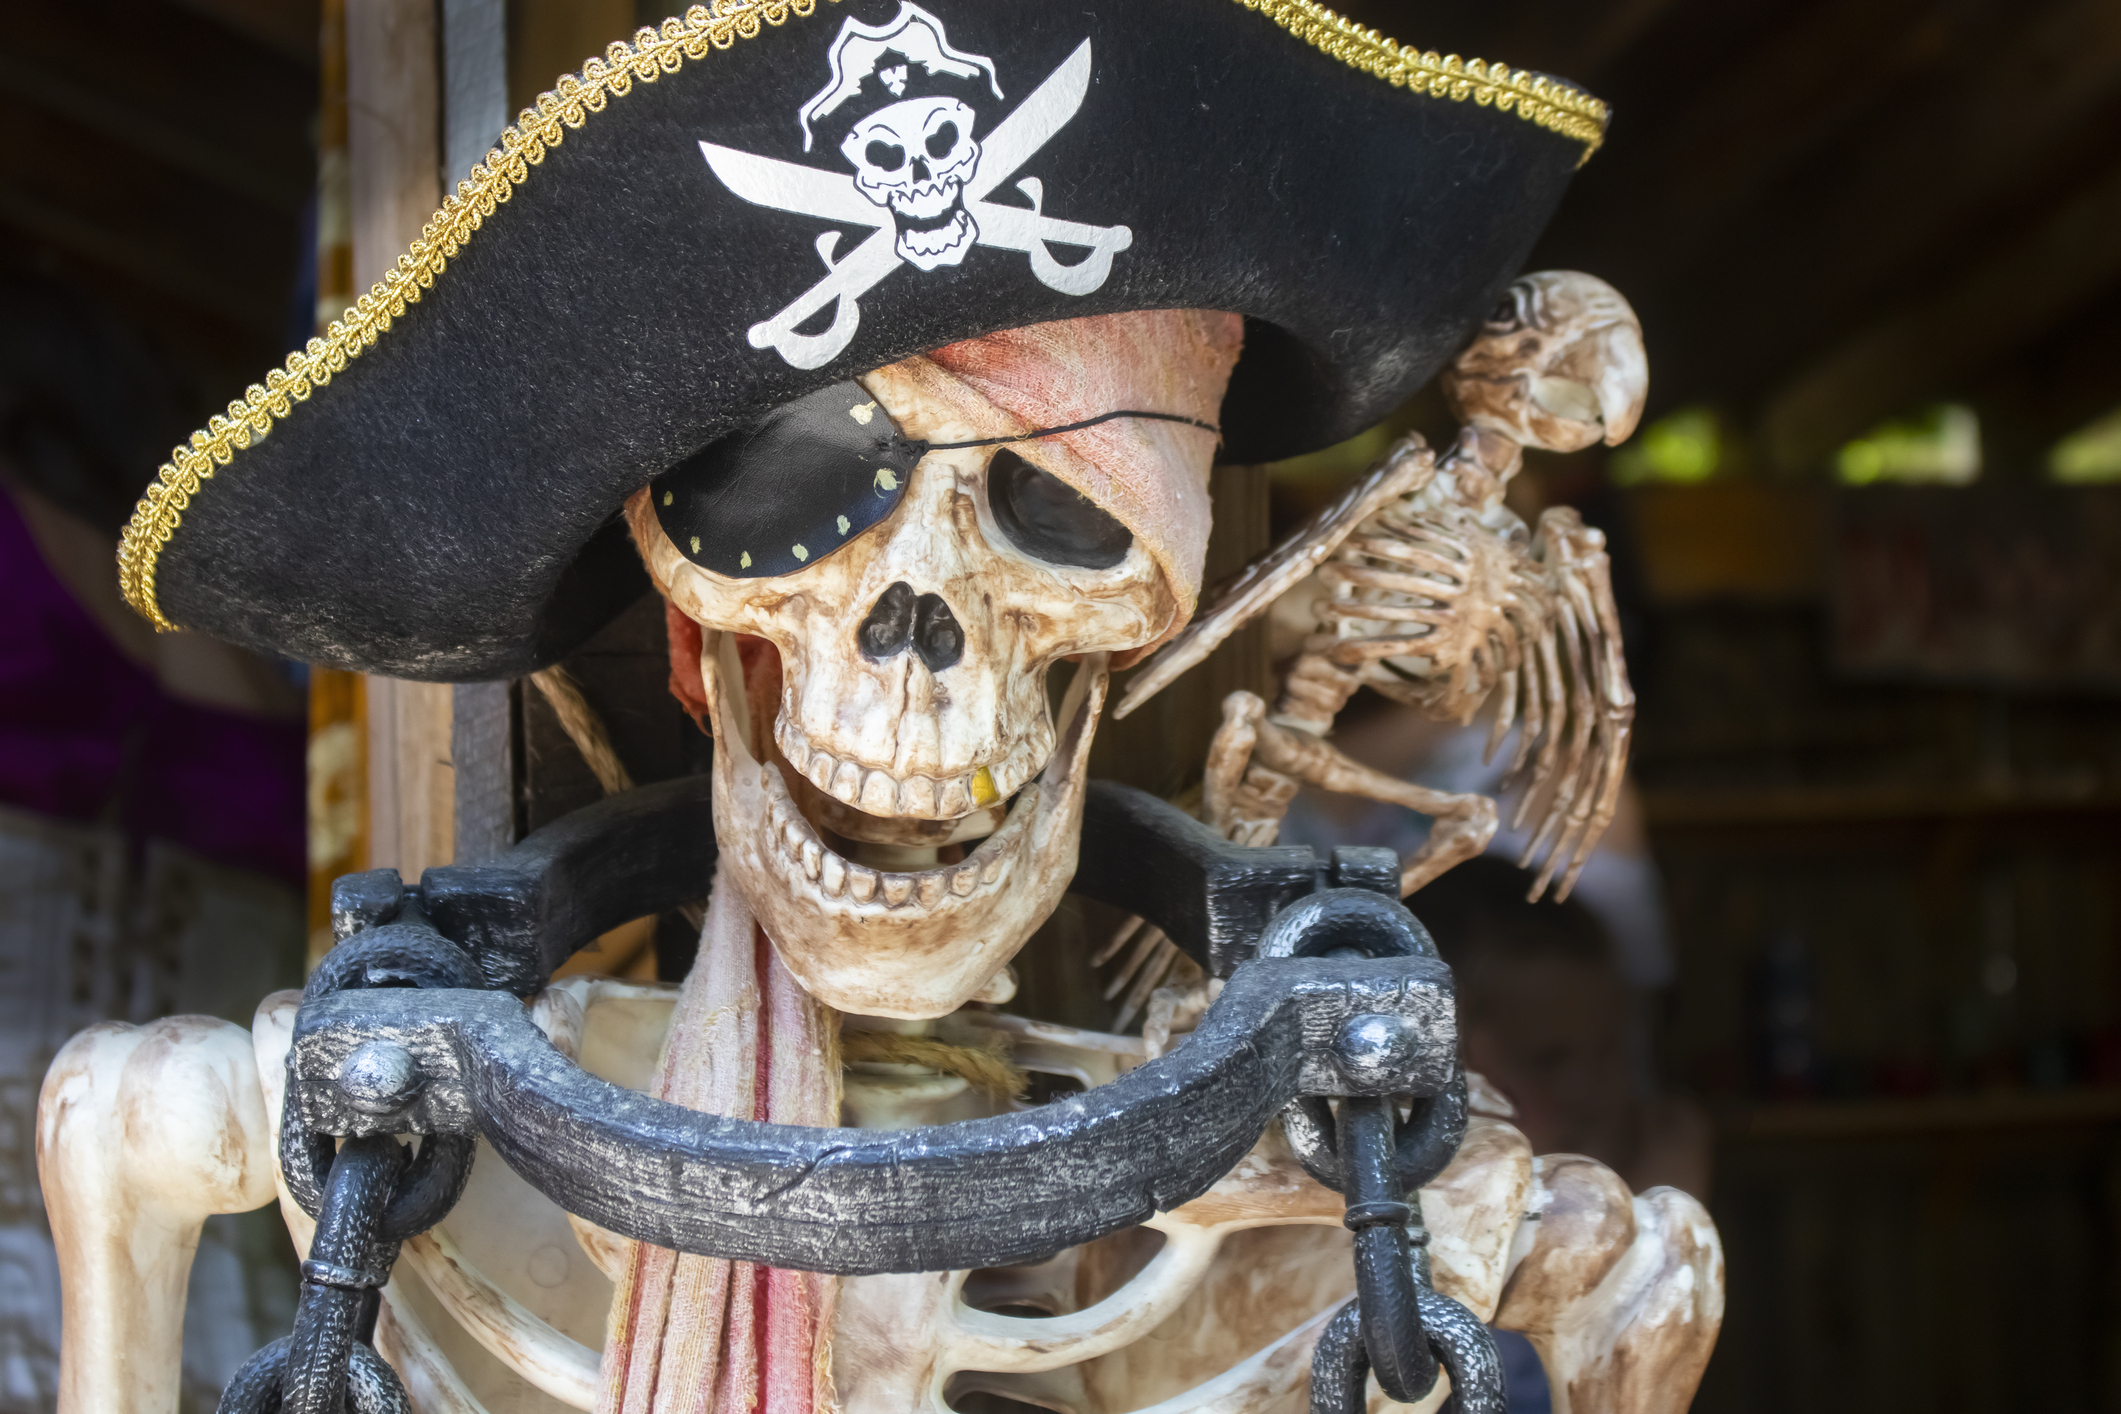 House Transformed Into Incredible Spooky Pirate Shipwreck for Halloween